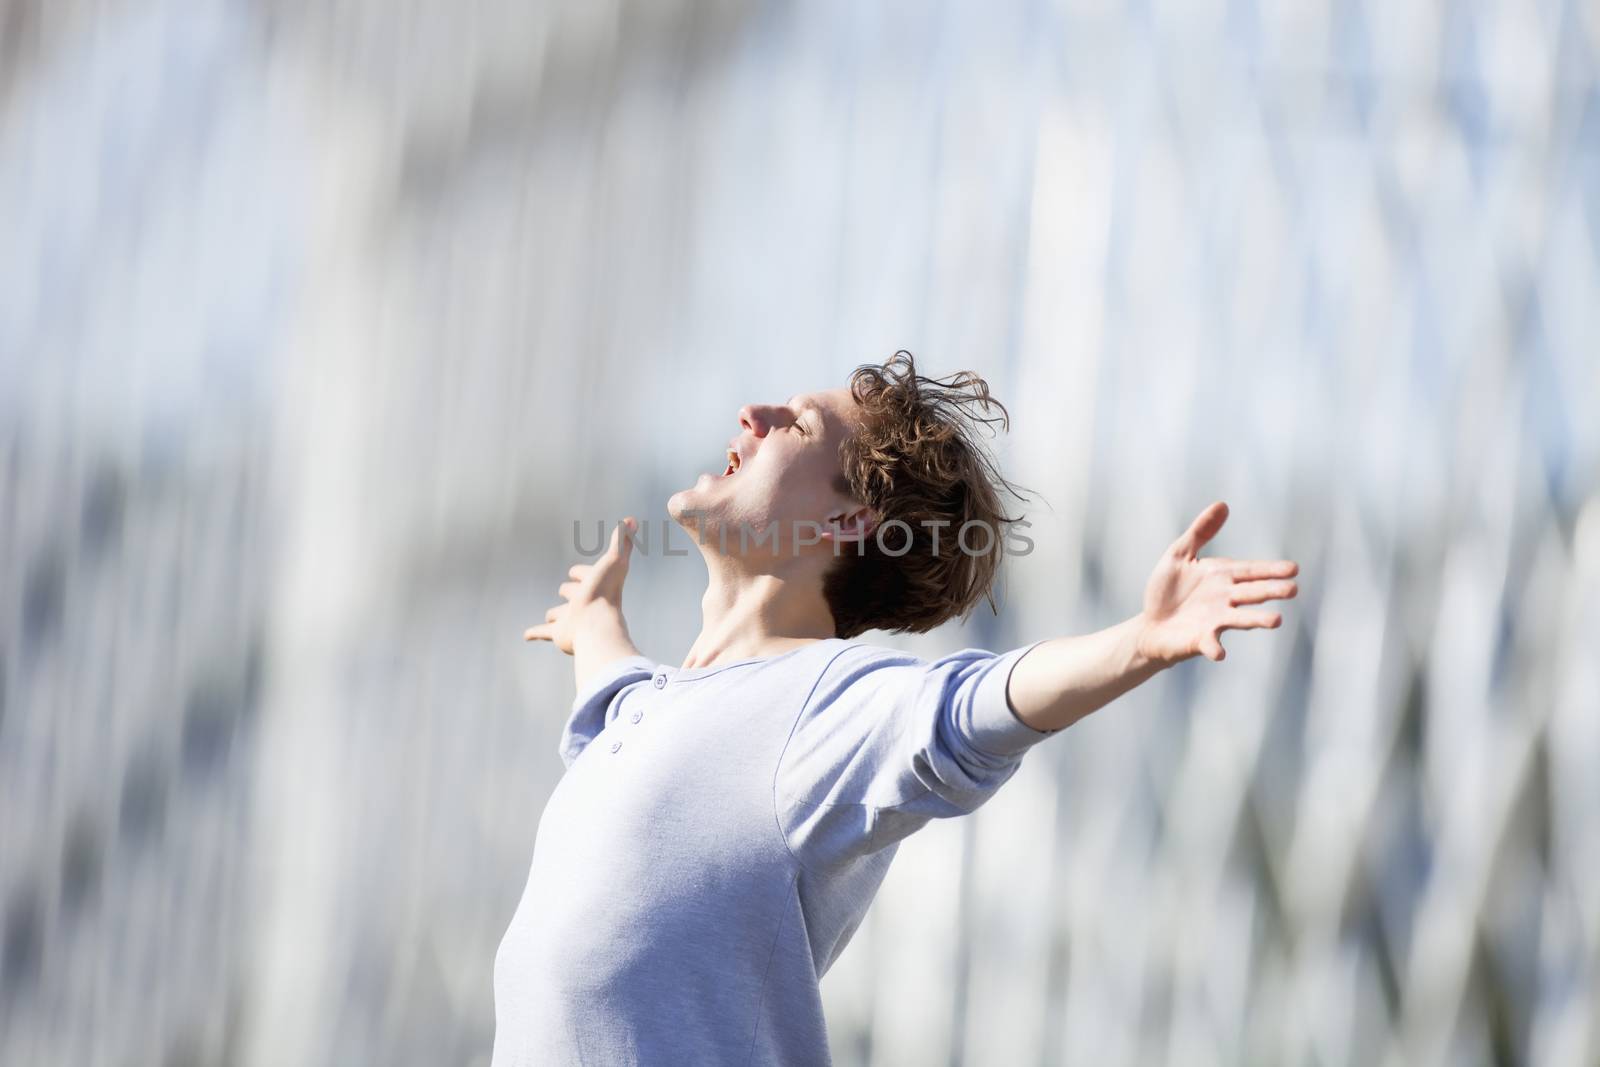 Excited Young Man Stretching out his Arm in Emotion by courtyardpix